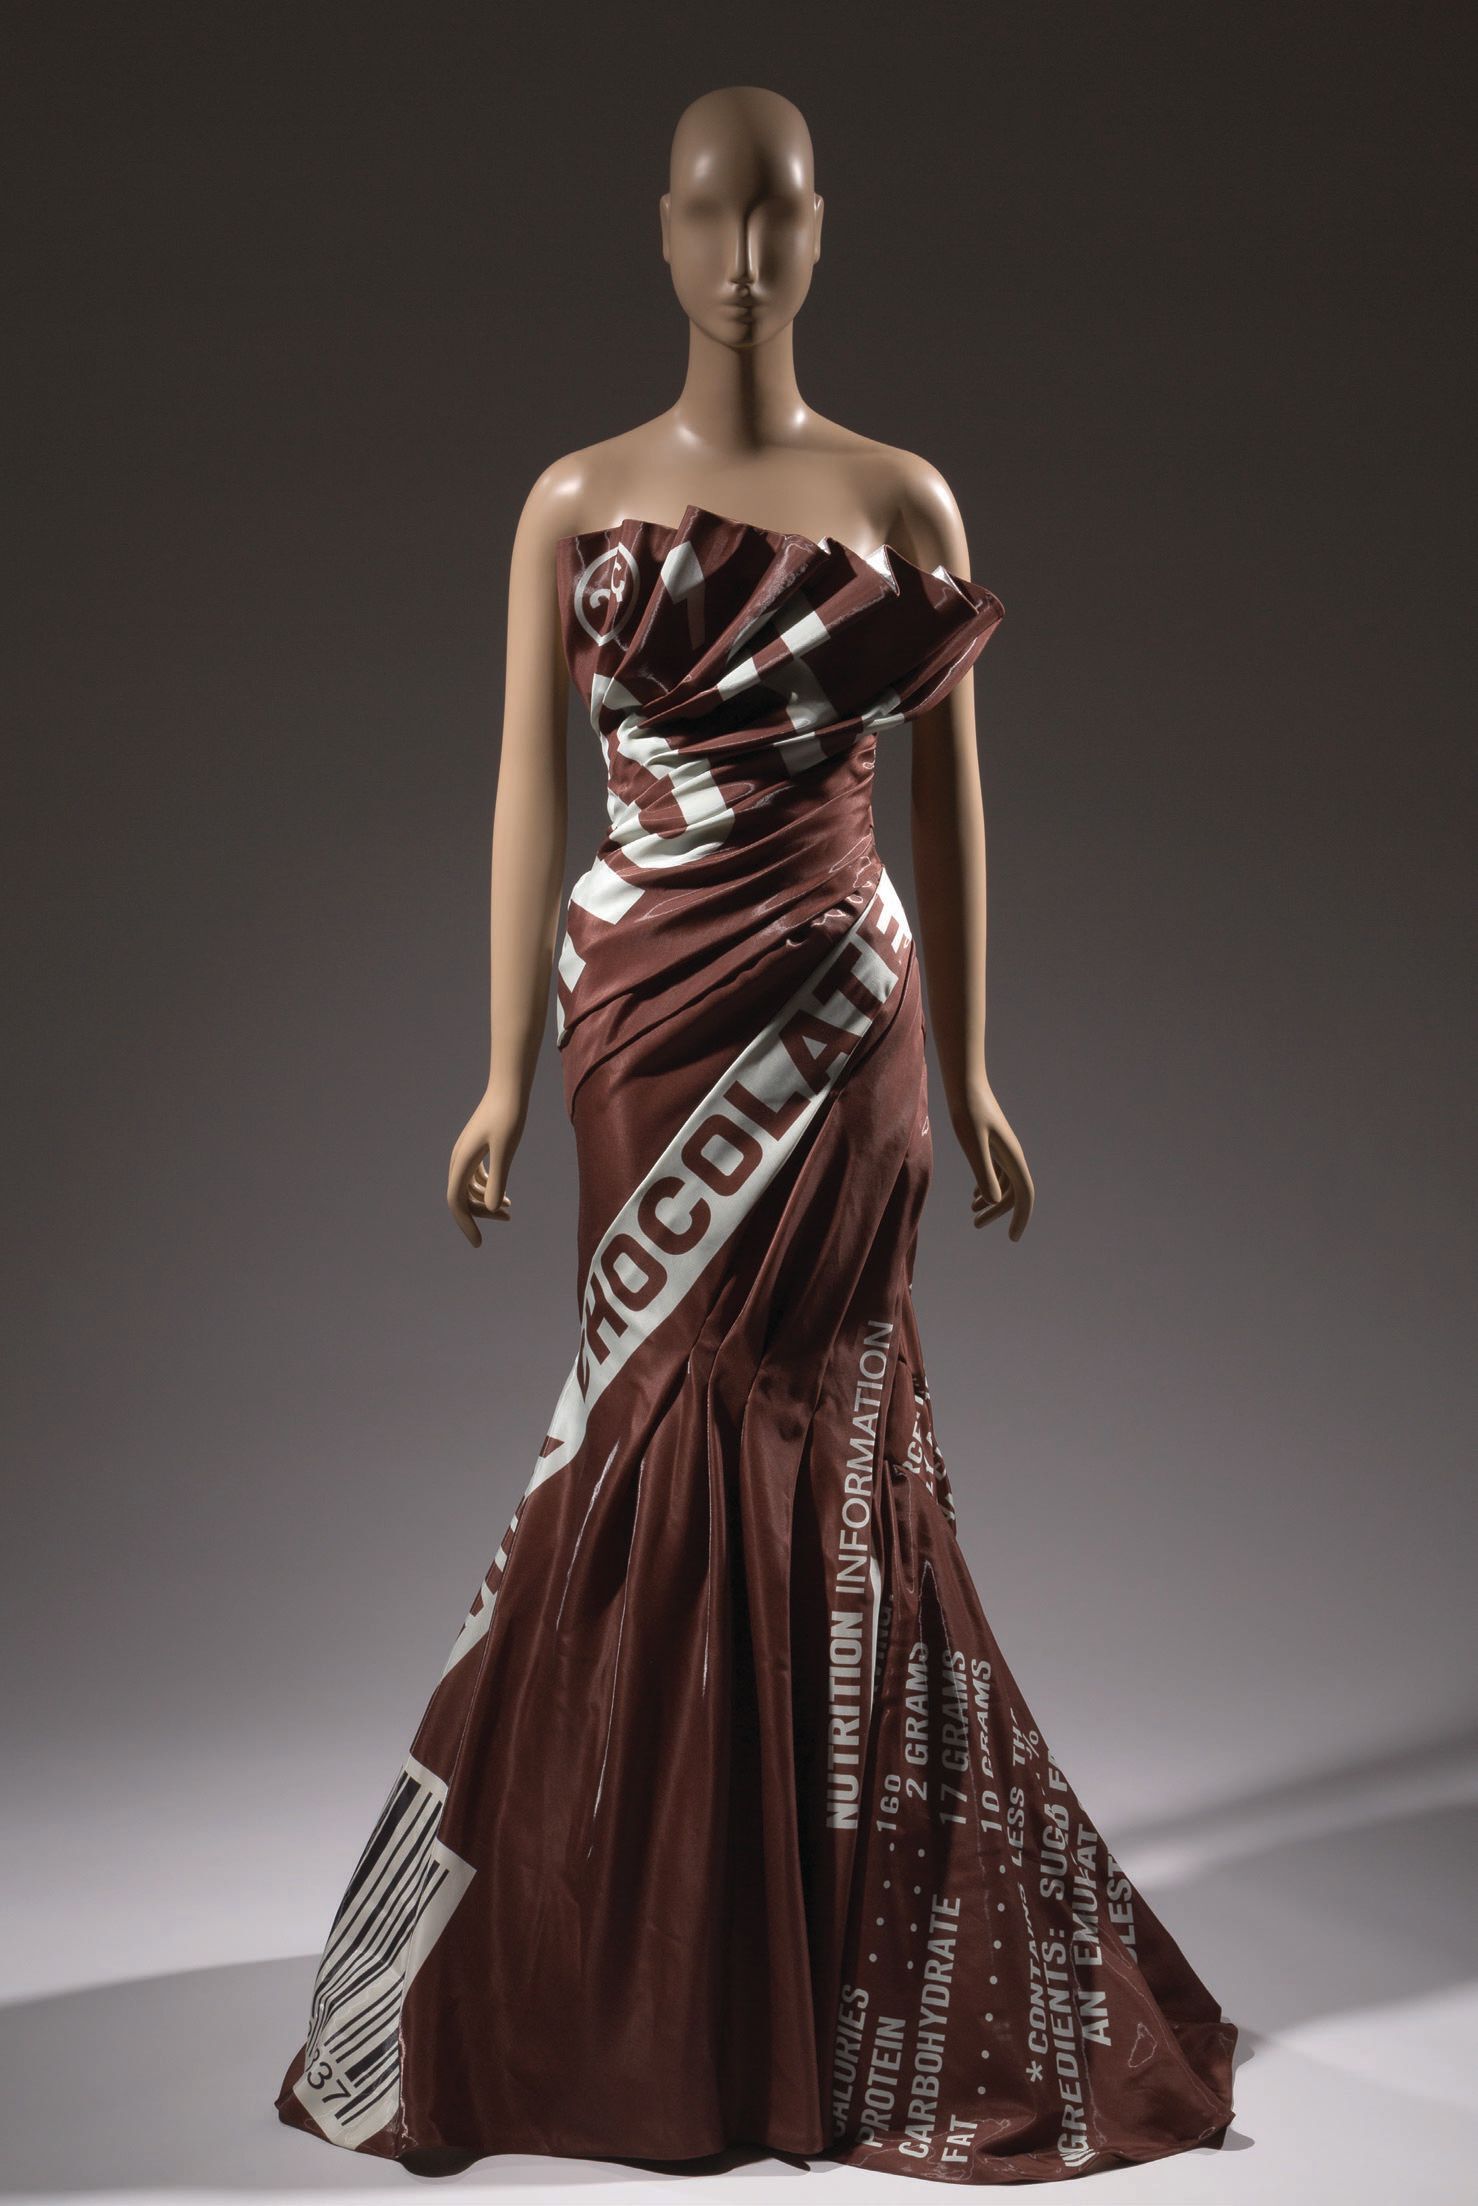 Moschino, chocolate bar gown, fall 2014 PHOTO © THE MUSEUM AT FIT